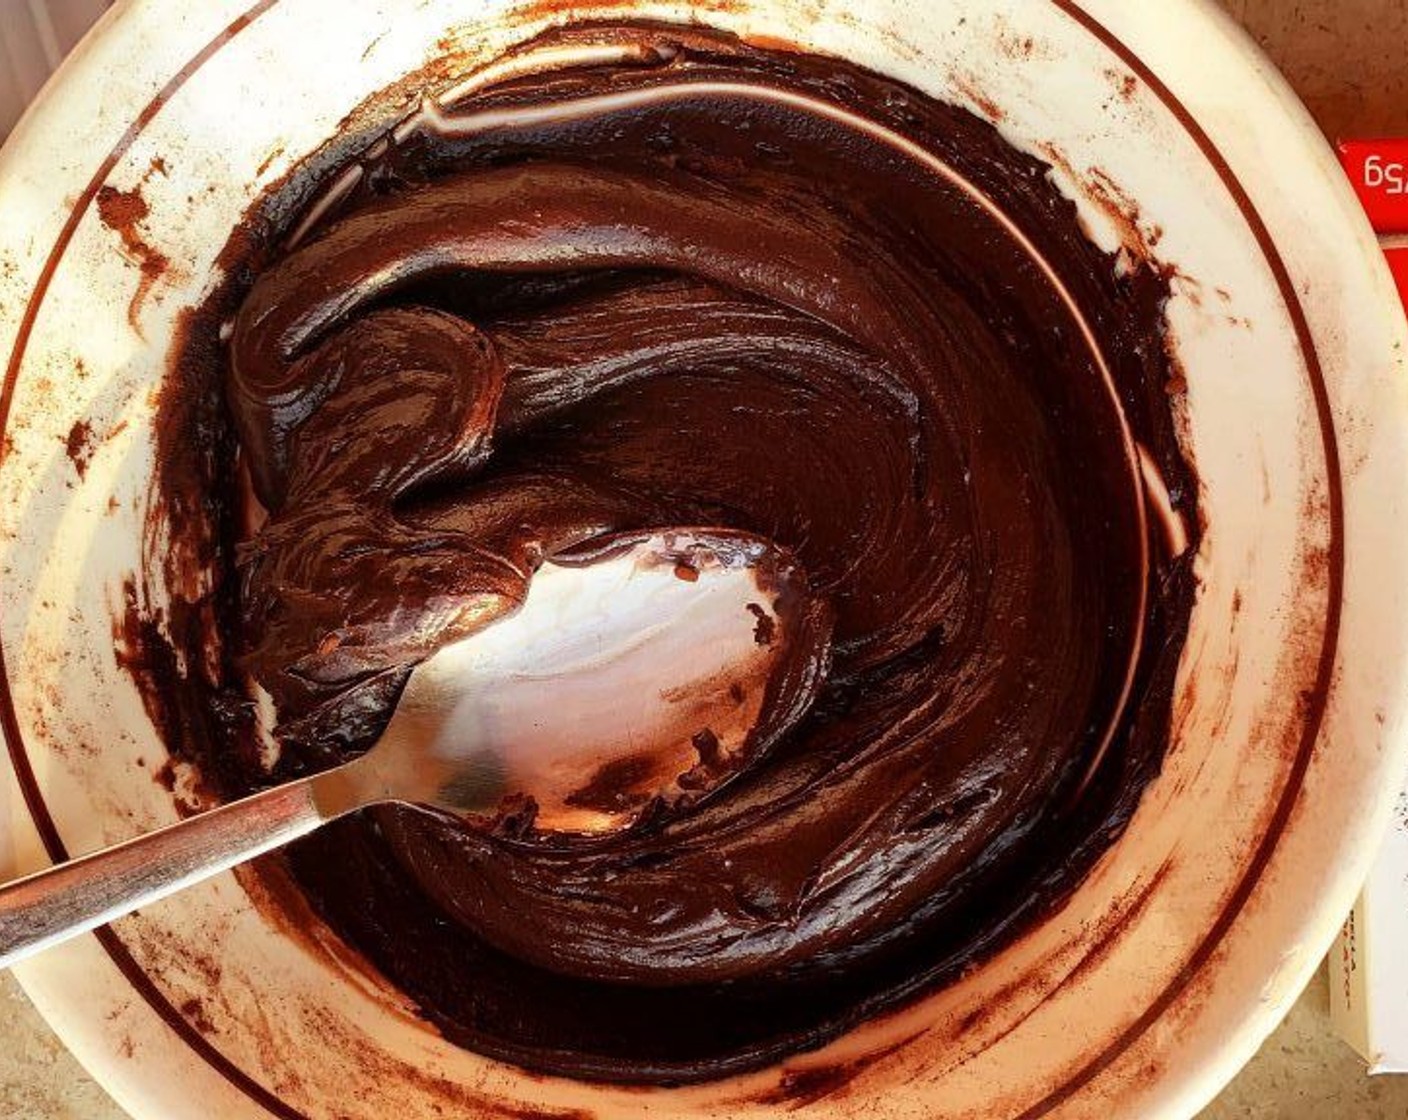 step 2 In a large bowl, stir together Sweetened Condensed Milk (1/3 cup) and Unsweetened Cocoa Powder (1/2 cup). Add the Salt (1/4 tsp).